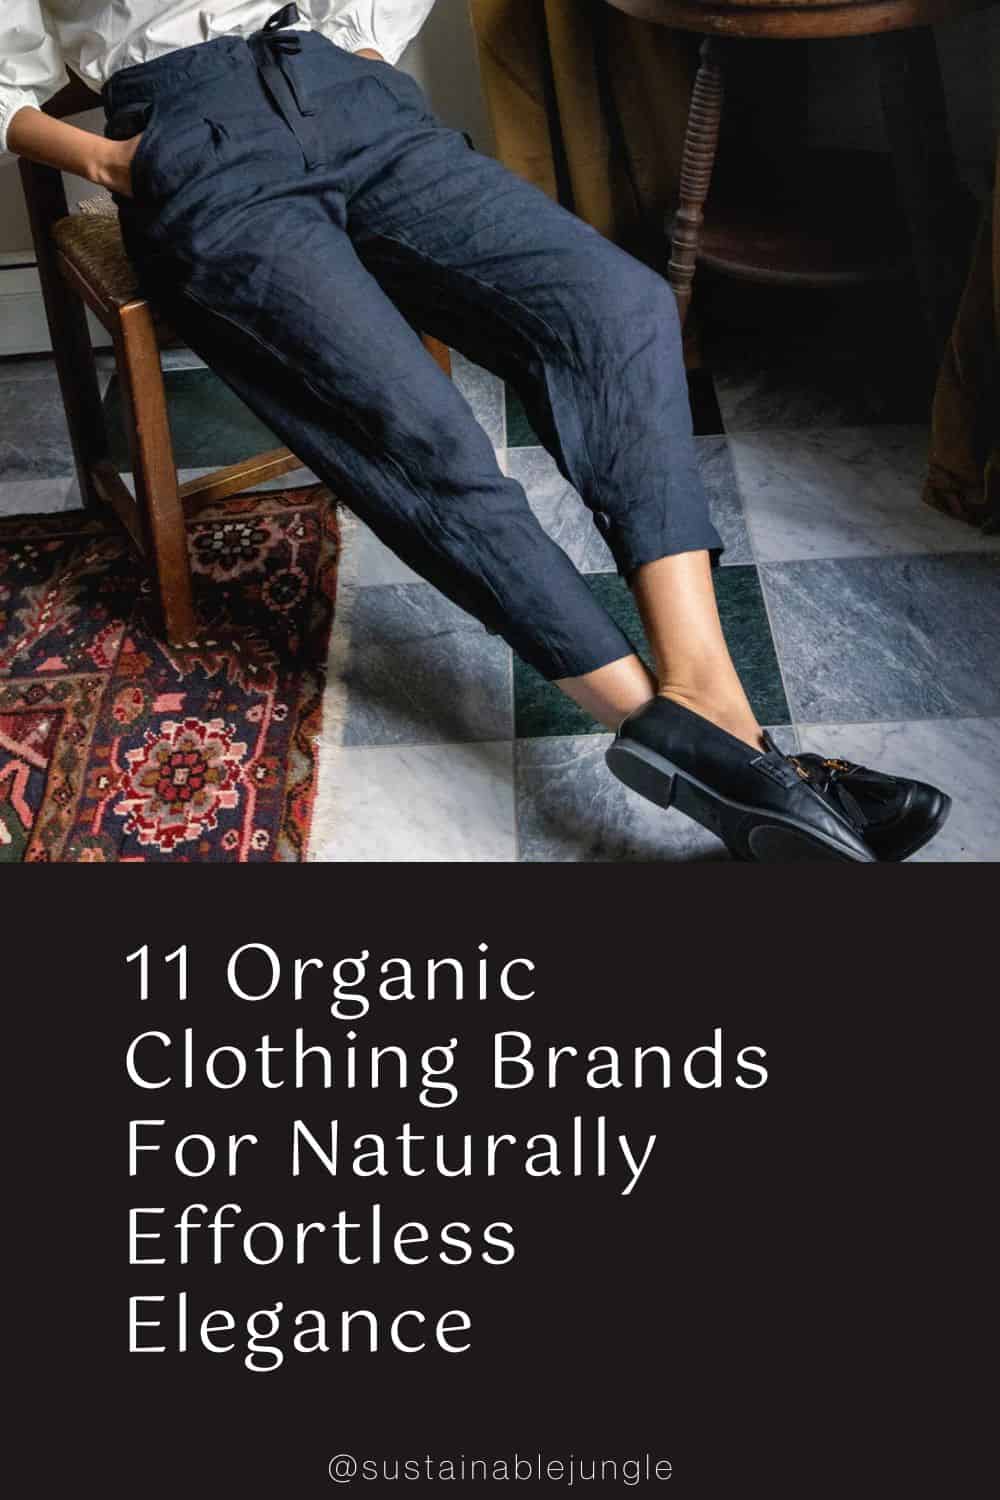 11 Organic Clothing Brands For Naturally Effortless Elegance Image by Cleobella #organicclothingbrands #bestorganicclothingbrands #organiccottonclothingbrands #naturalclothingbrands #naturalfiberlcothingbrands #sustainablejungle